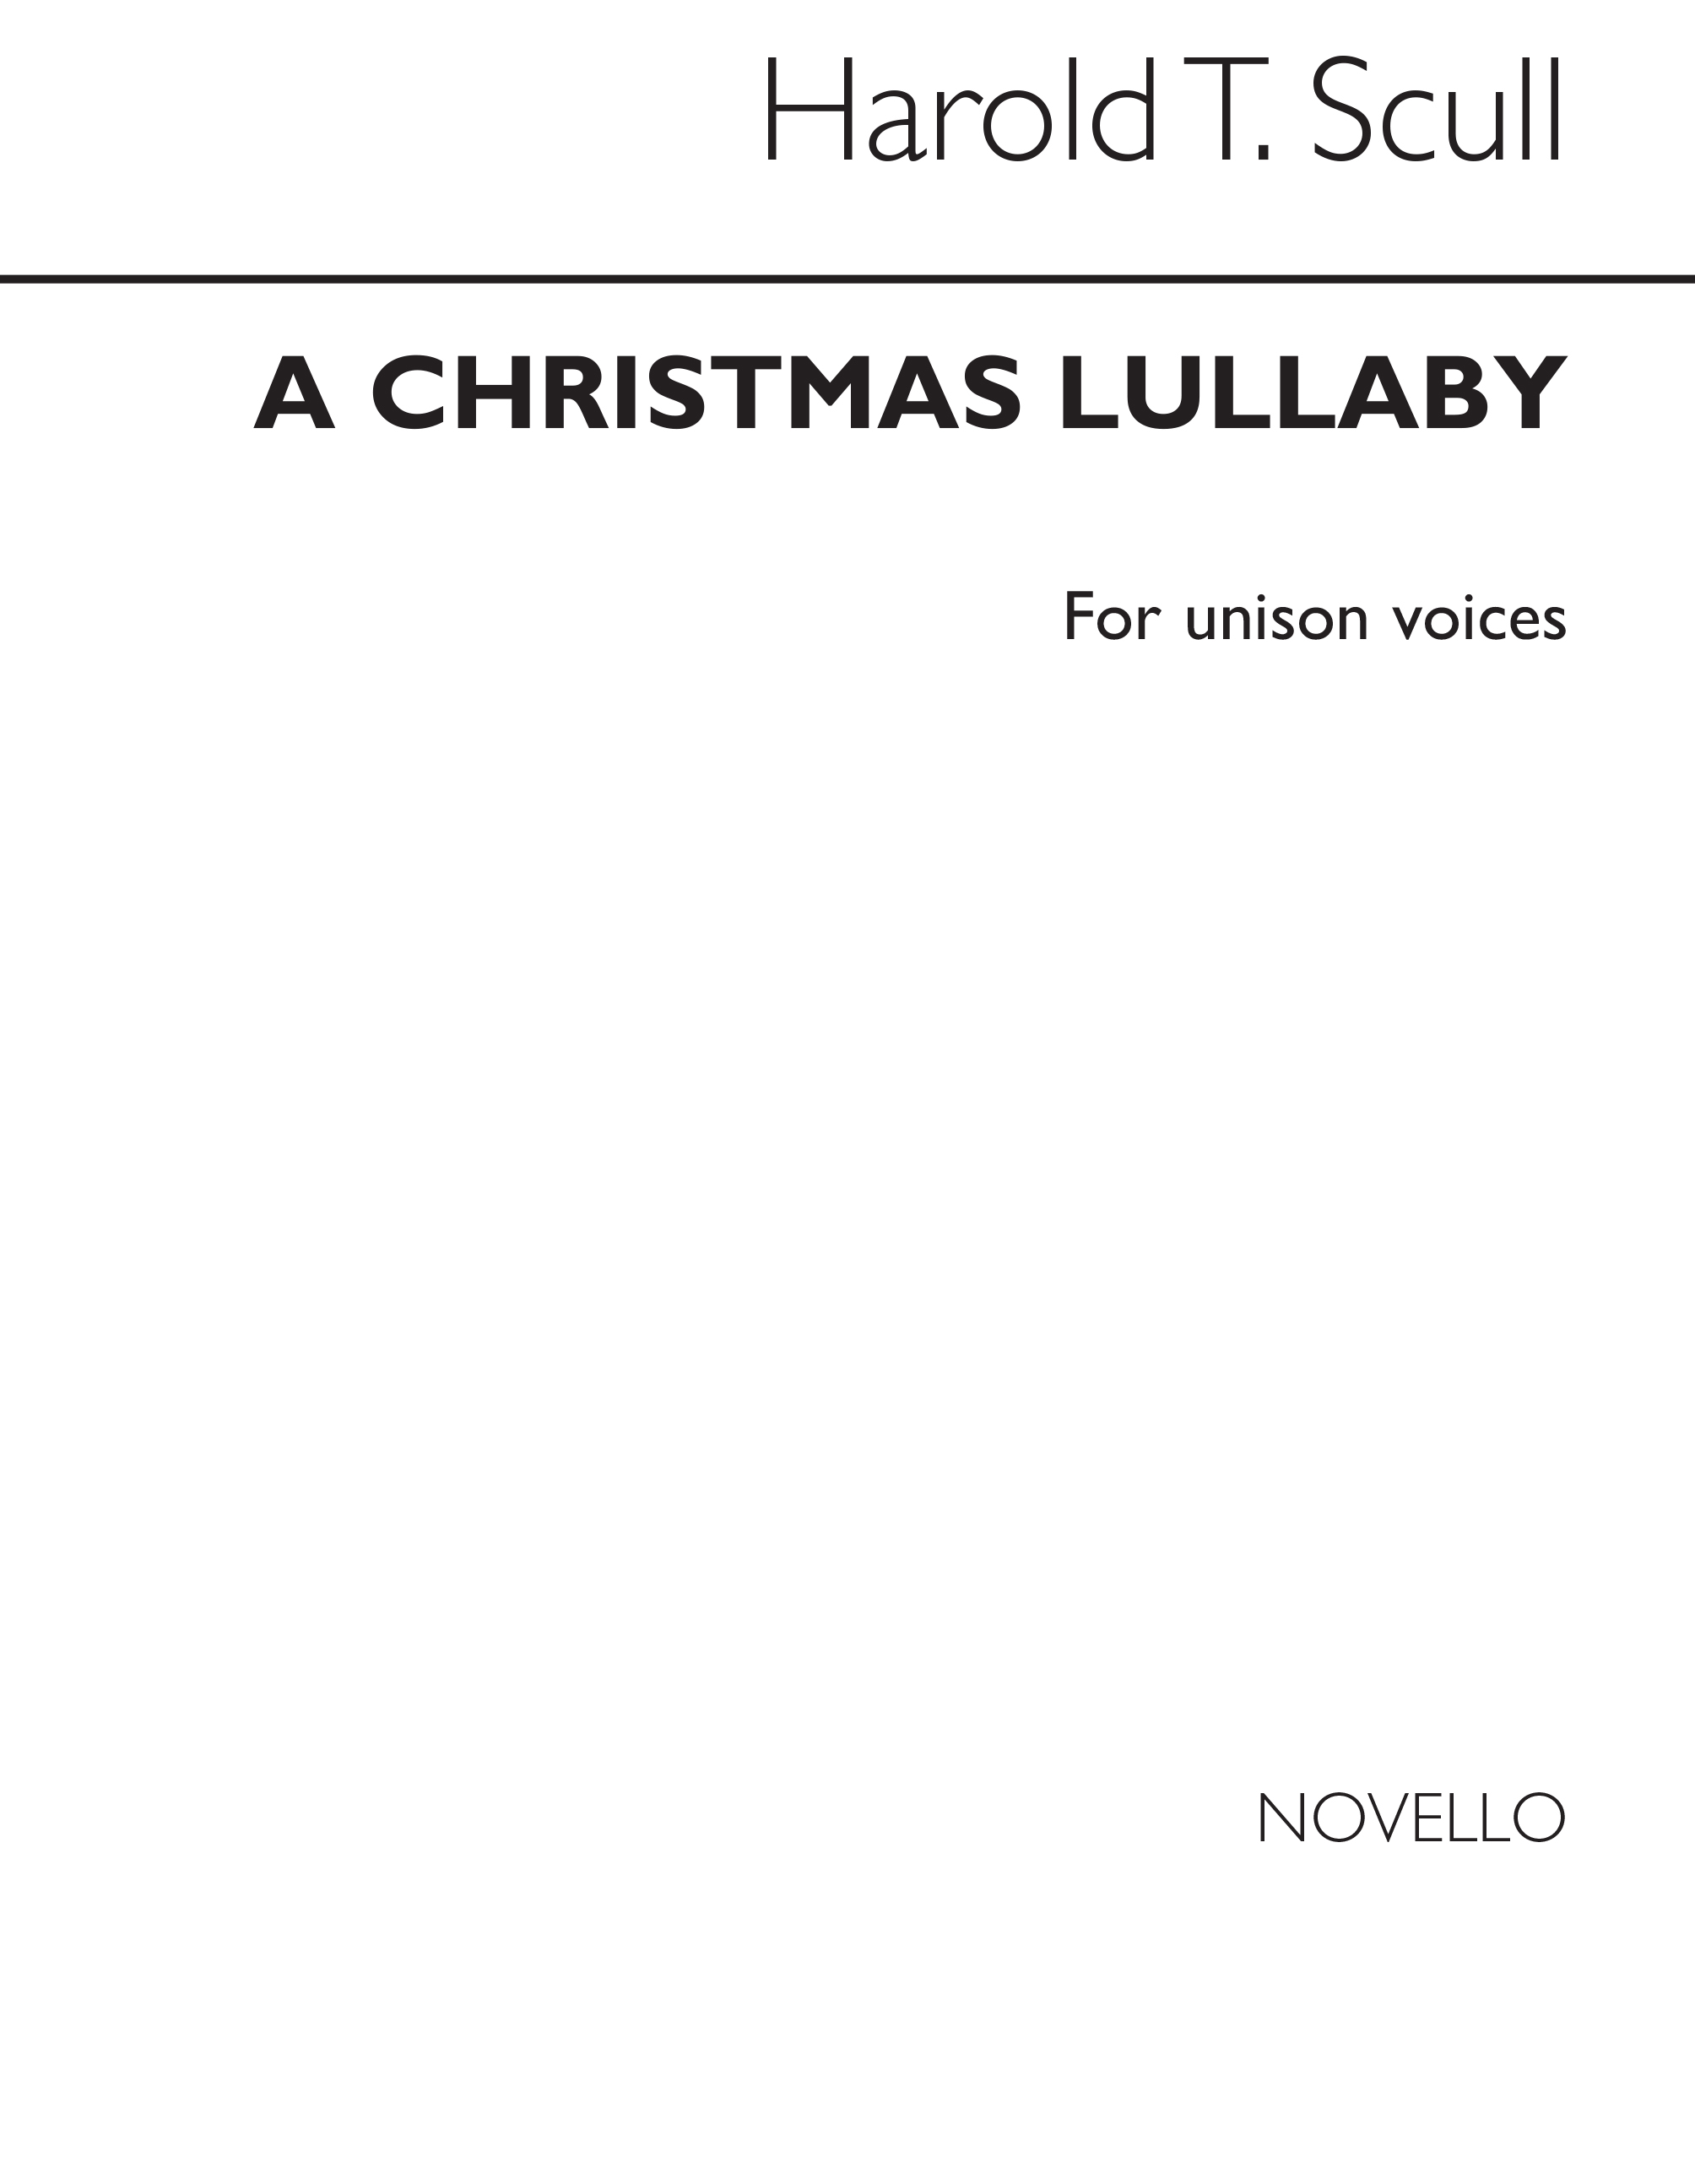 H. Scull: Christmas Lullaby: Unison Voices: Vocal Score